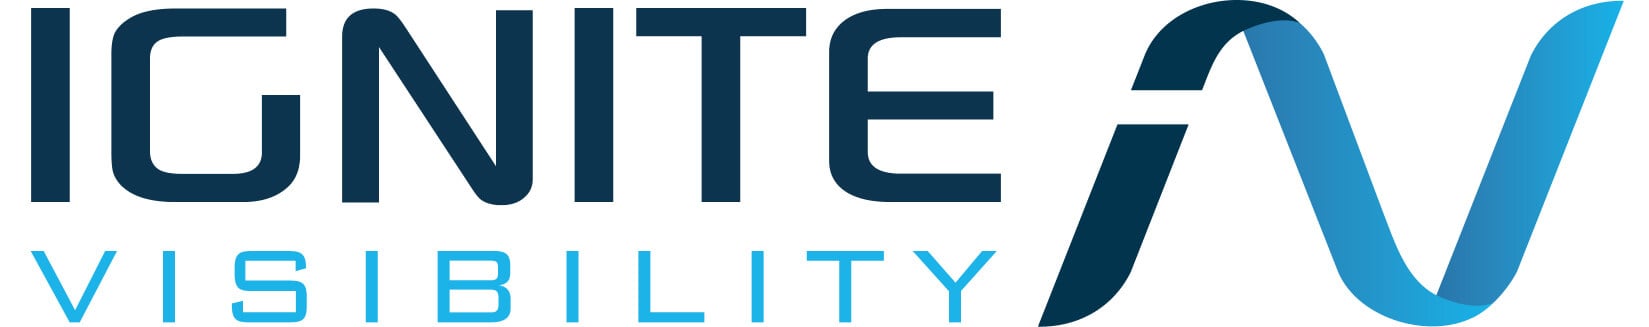 Best ORM Firm Logo: Ignite Visibility